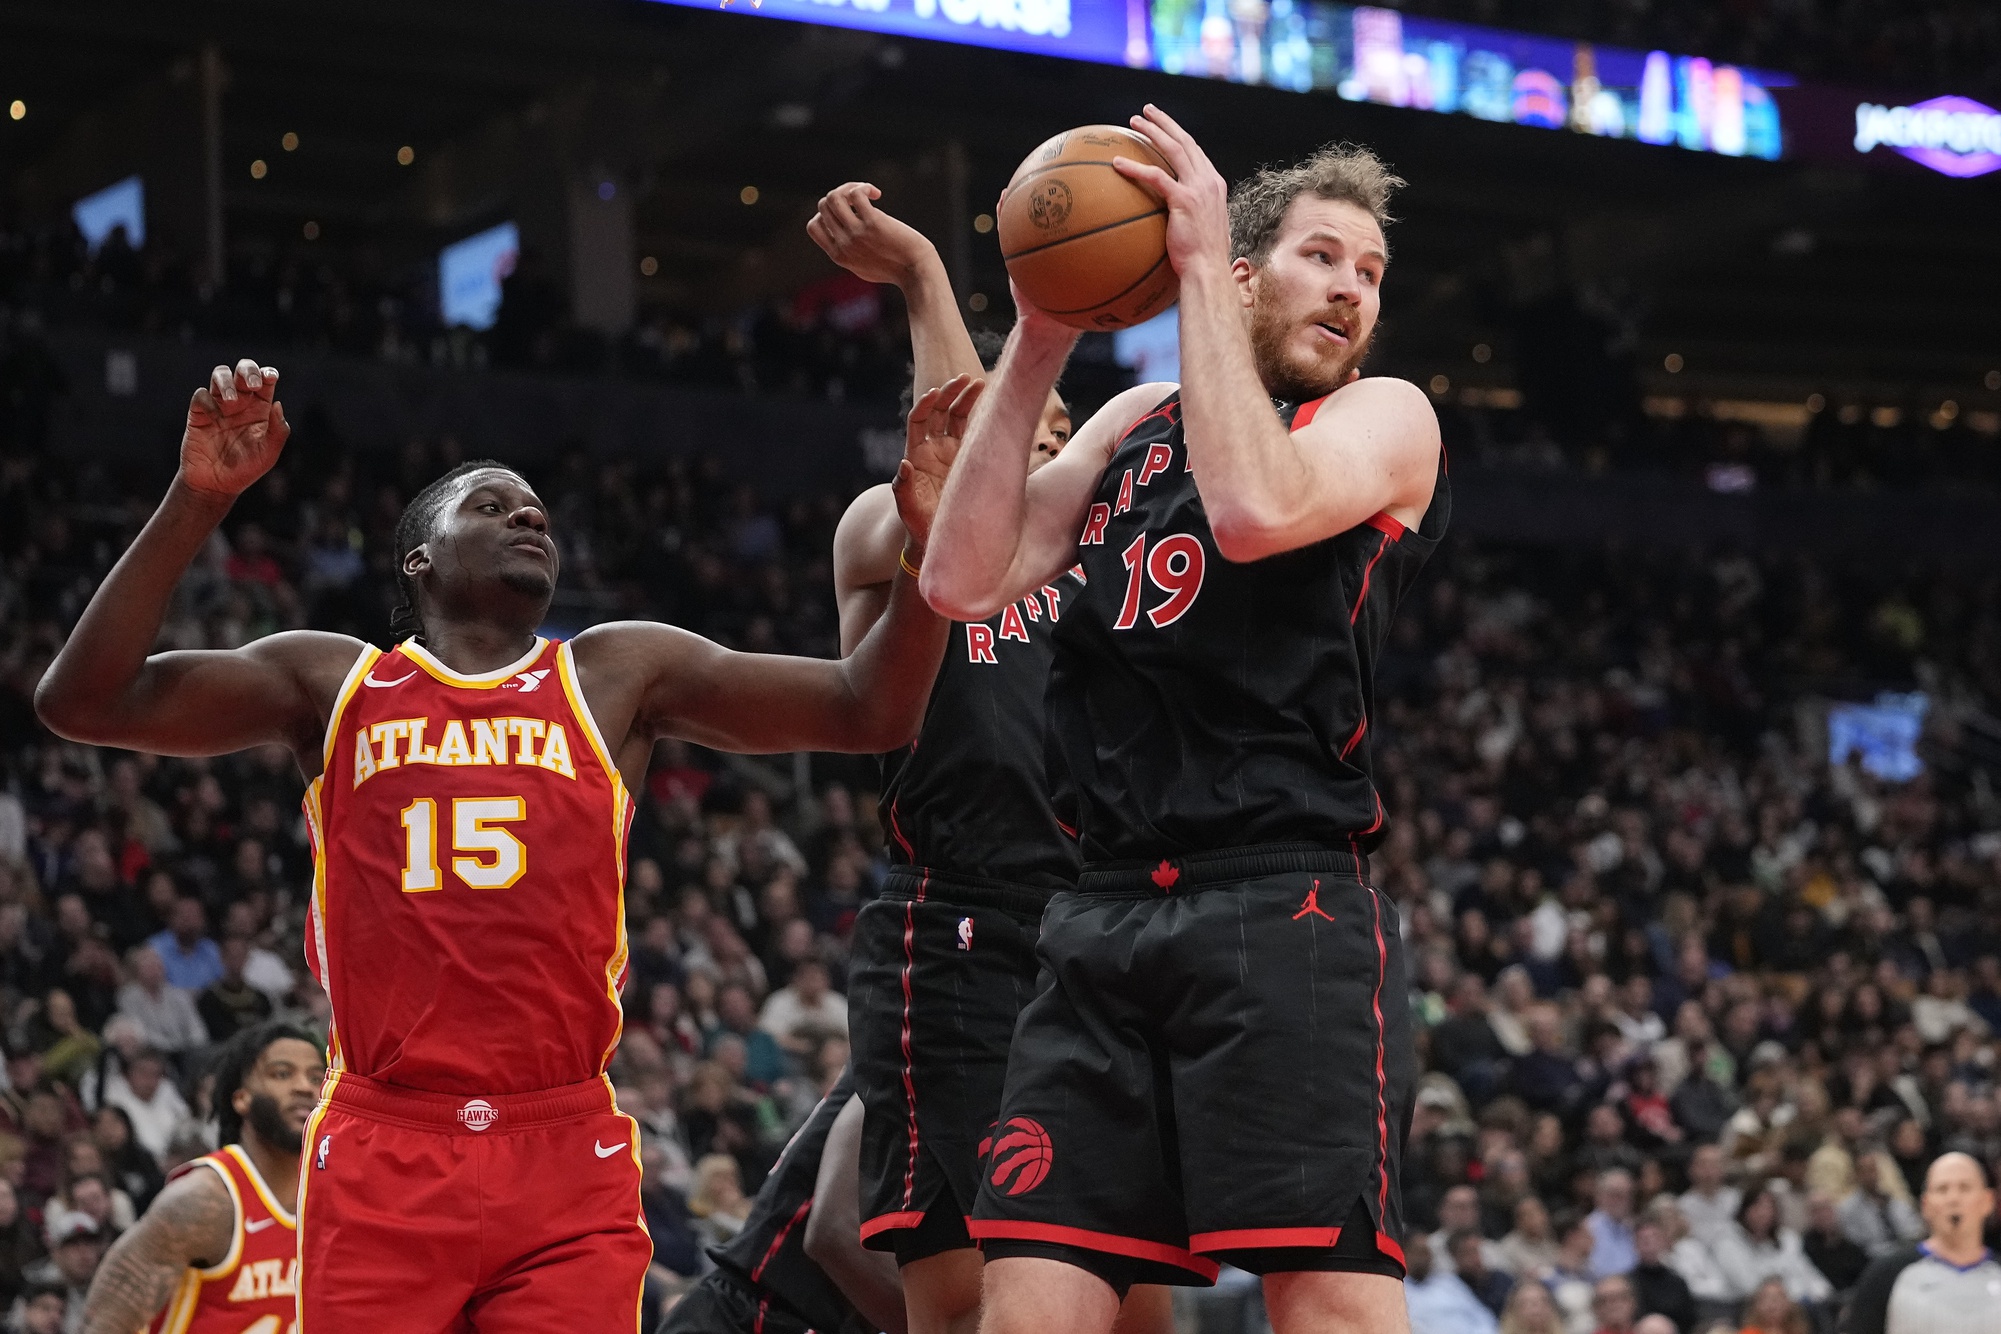 Dec 15, 2023; Toronto, Ontario, CAN; Toronto Raptors center Jakob Poeltl (19) comes down with a rebound against Atlanta Hawks center Clint Capela (15) during the first half at Scotiabank Arena. Mandatory Credit: John E. Sokolowski-USA TODAY Sports